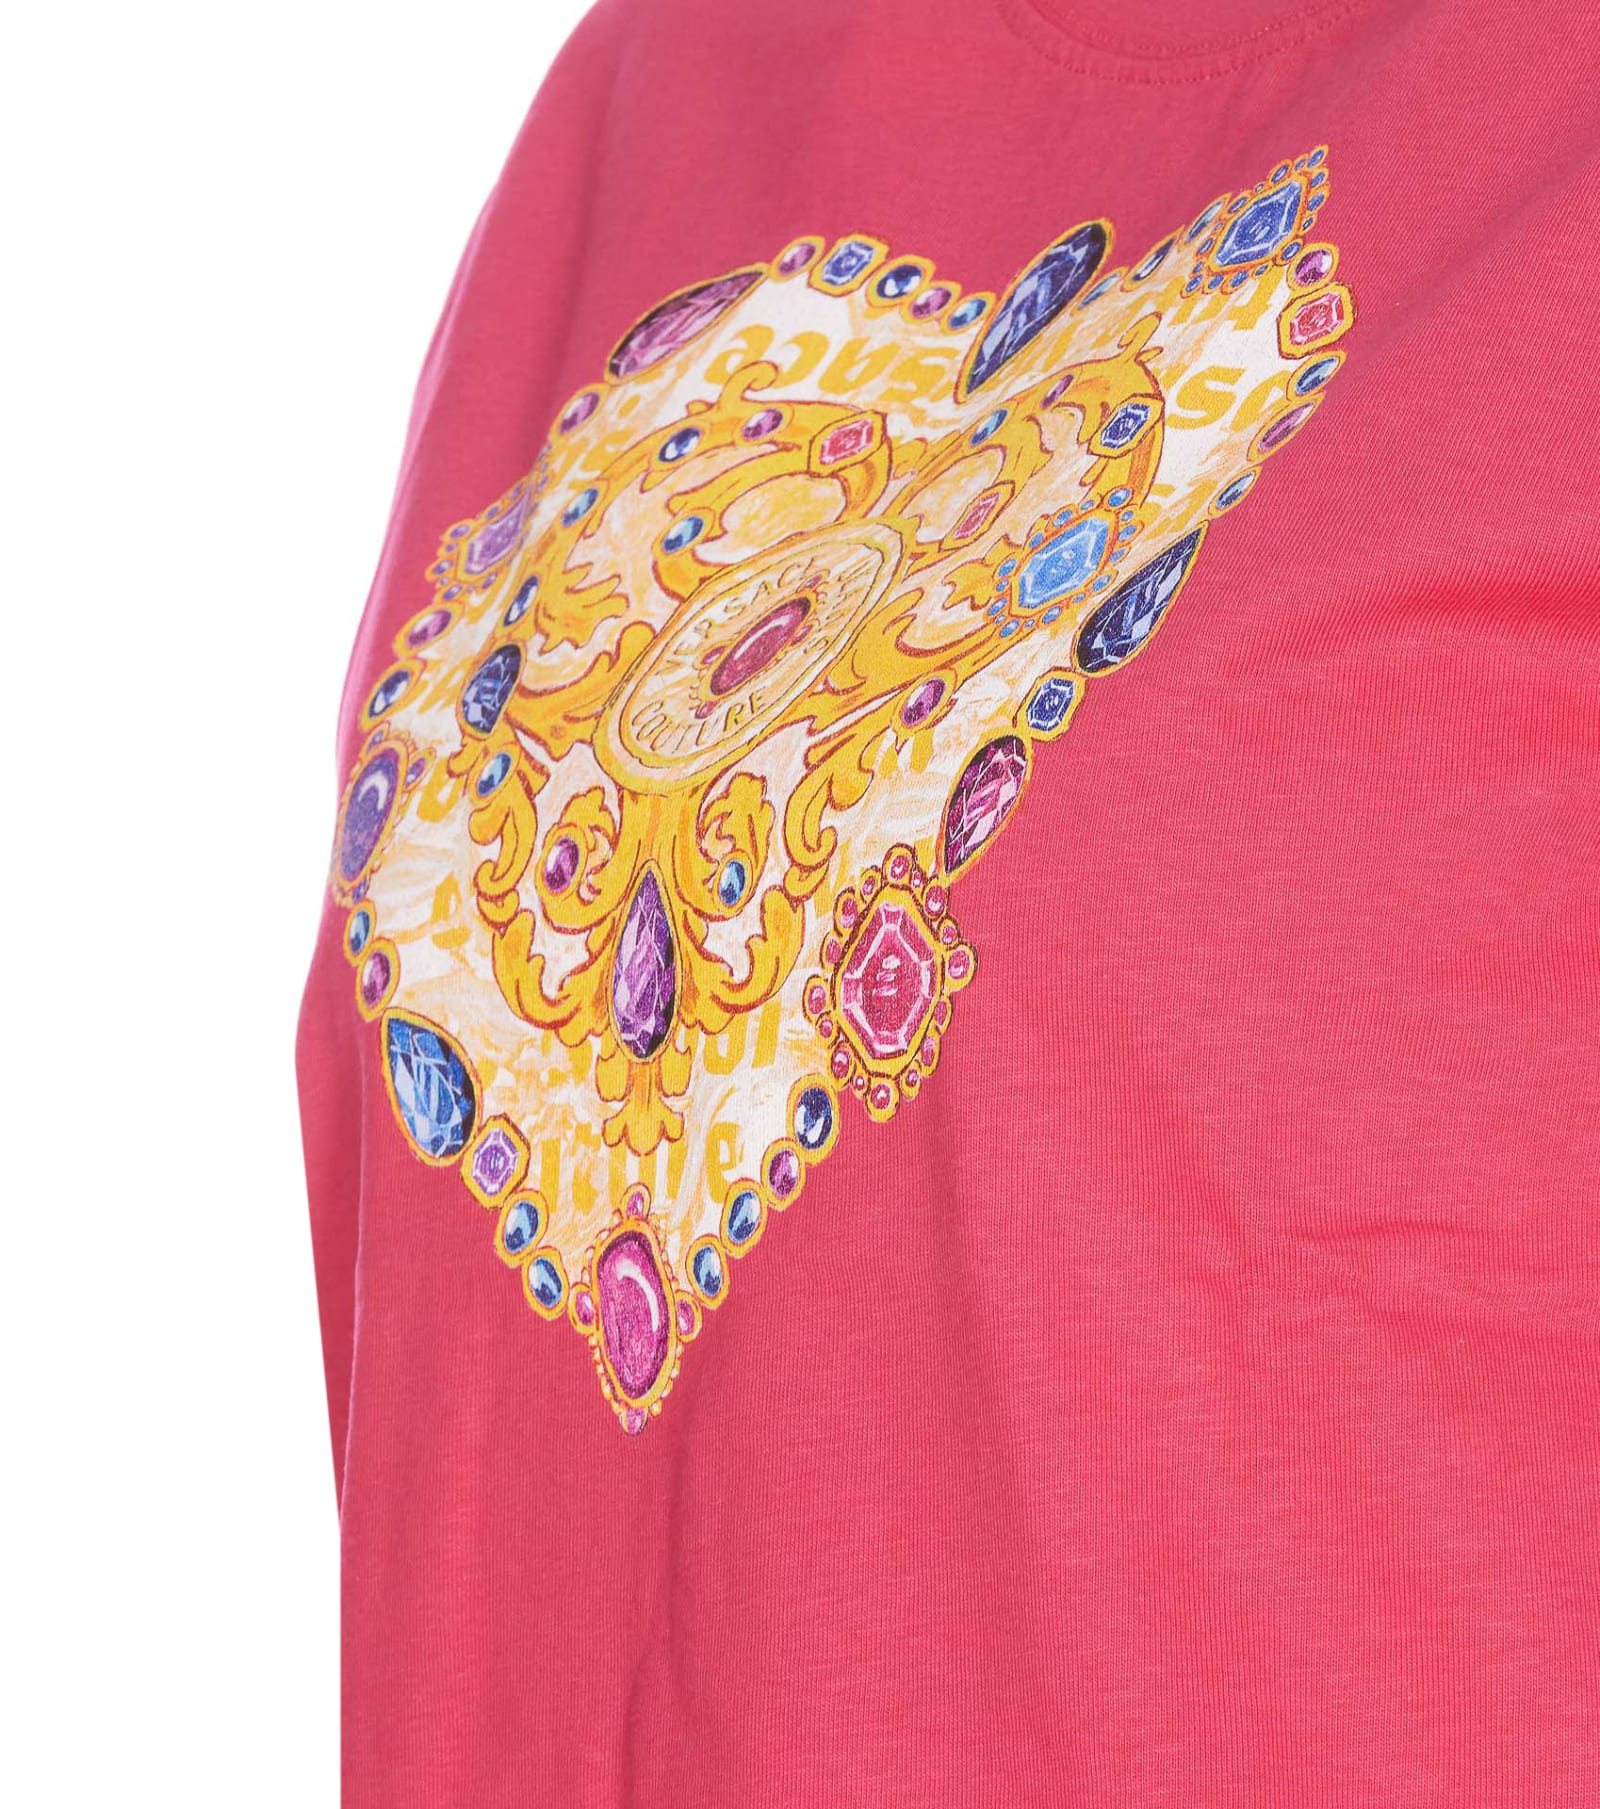 Shop Versace Jeans Couture Heart Couture T-shirt In Fuchsia